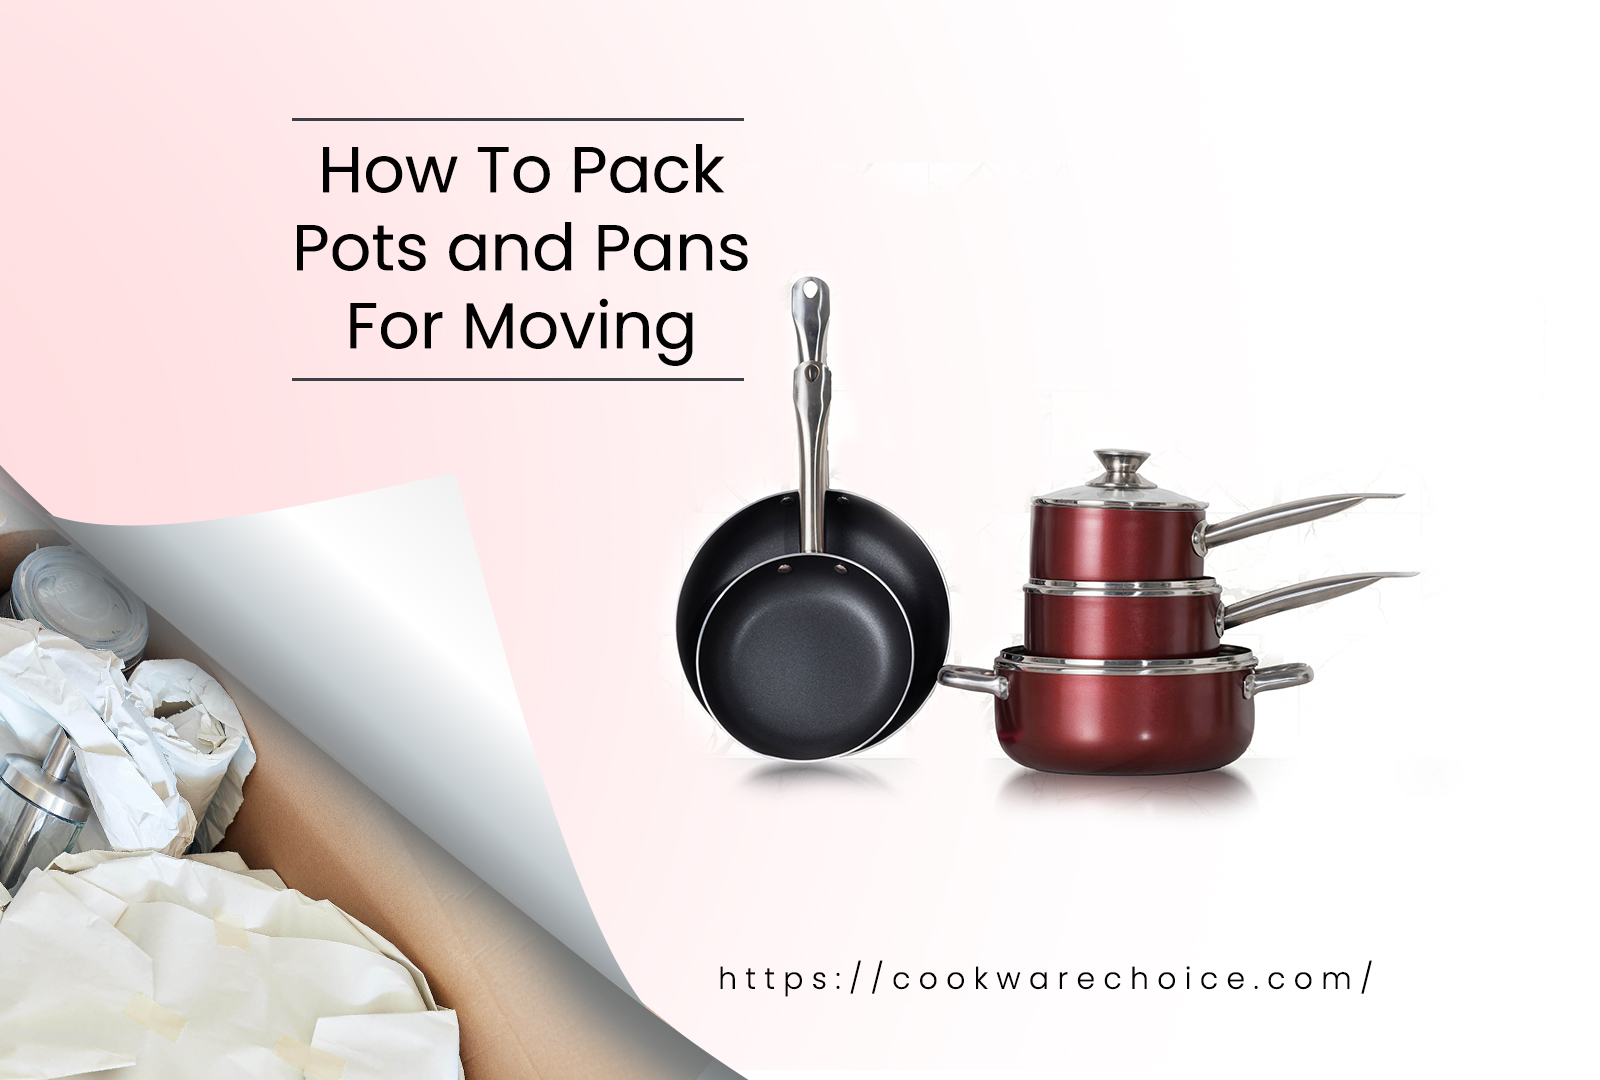 How to Pack Pots and Pans